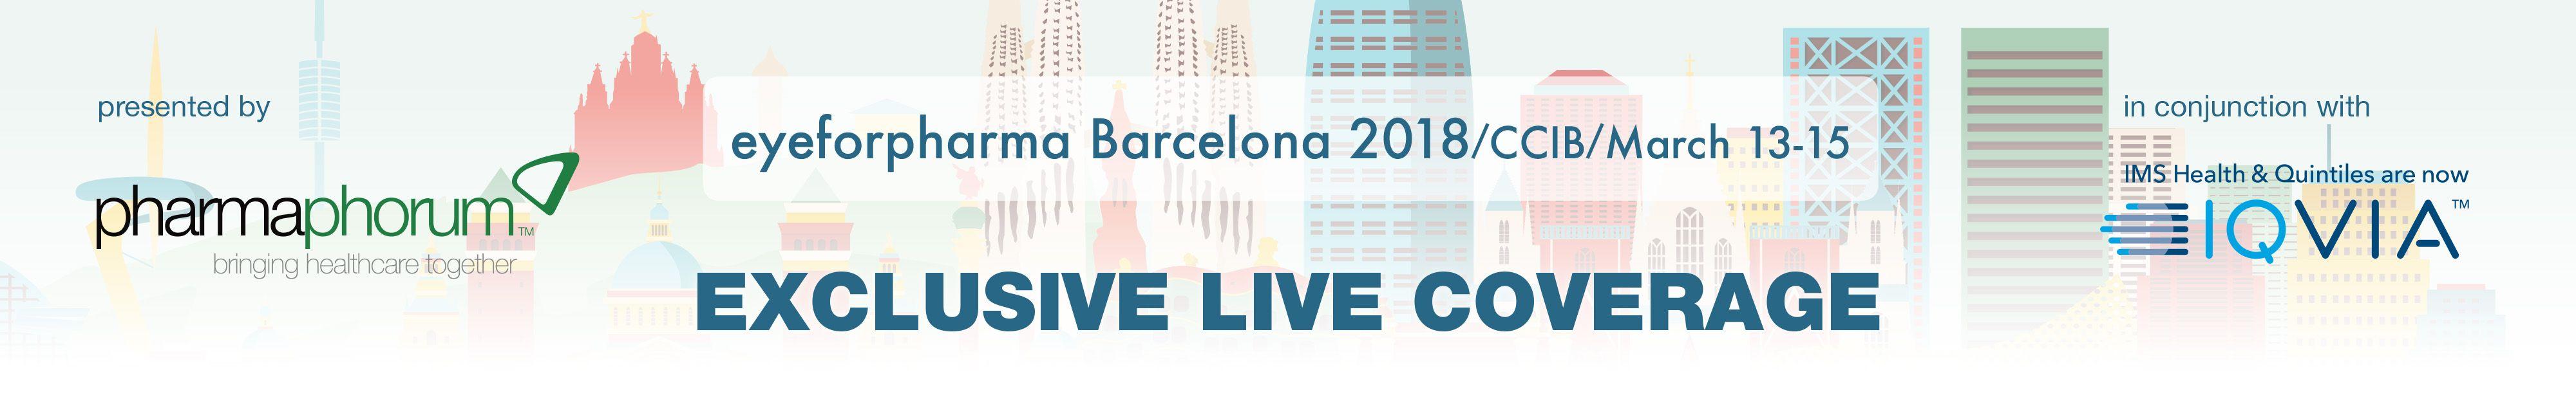 Iqvia Logo - Exclusive insights and coverage from eyeforpharma Barcelona 2018 ...